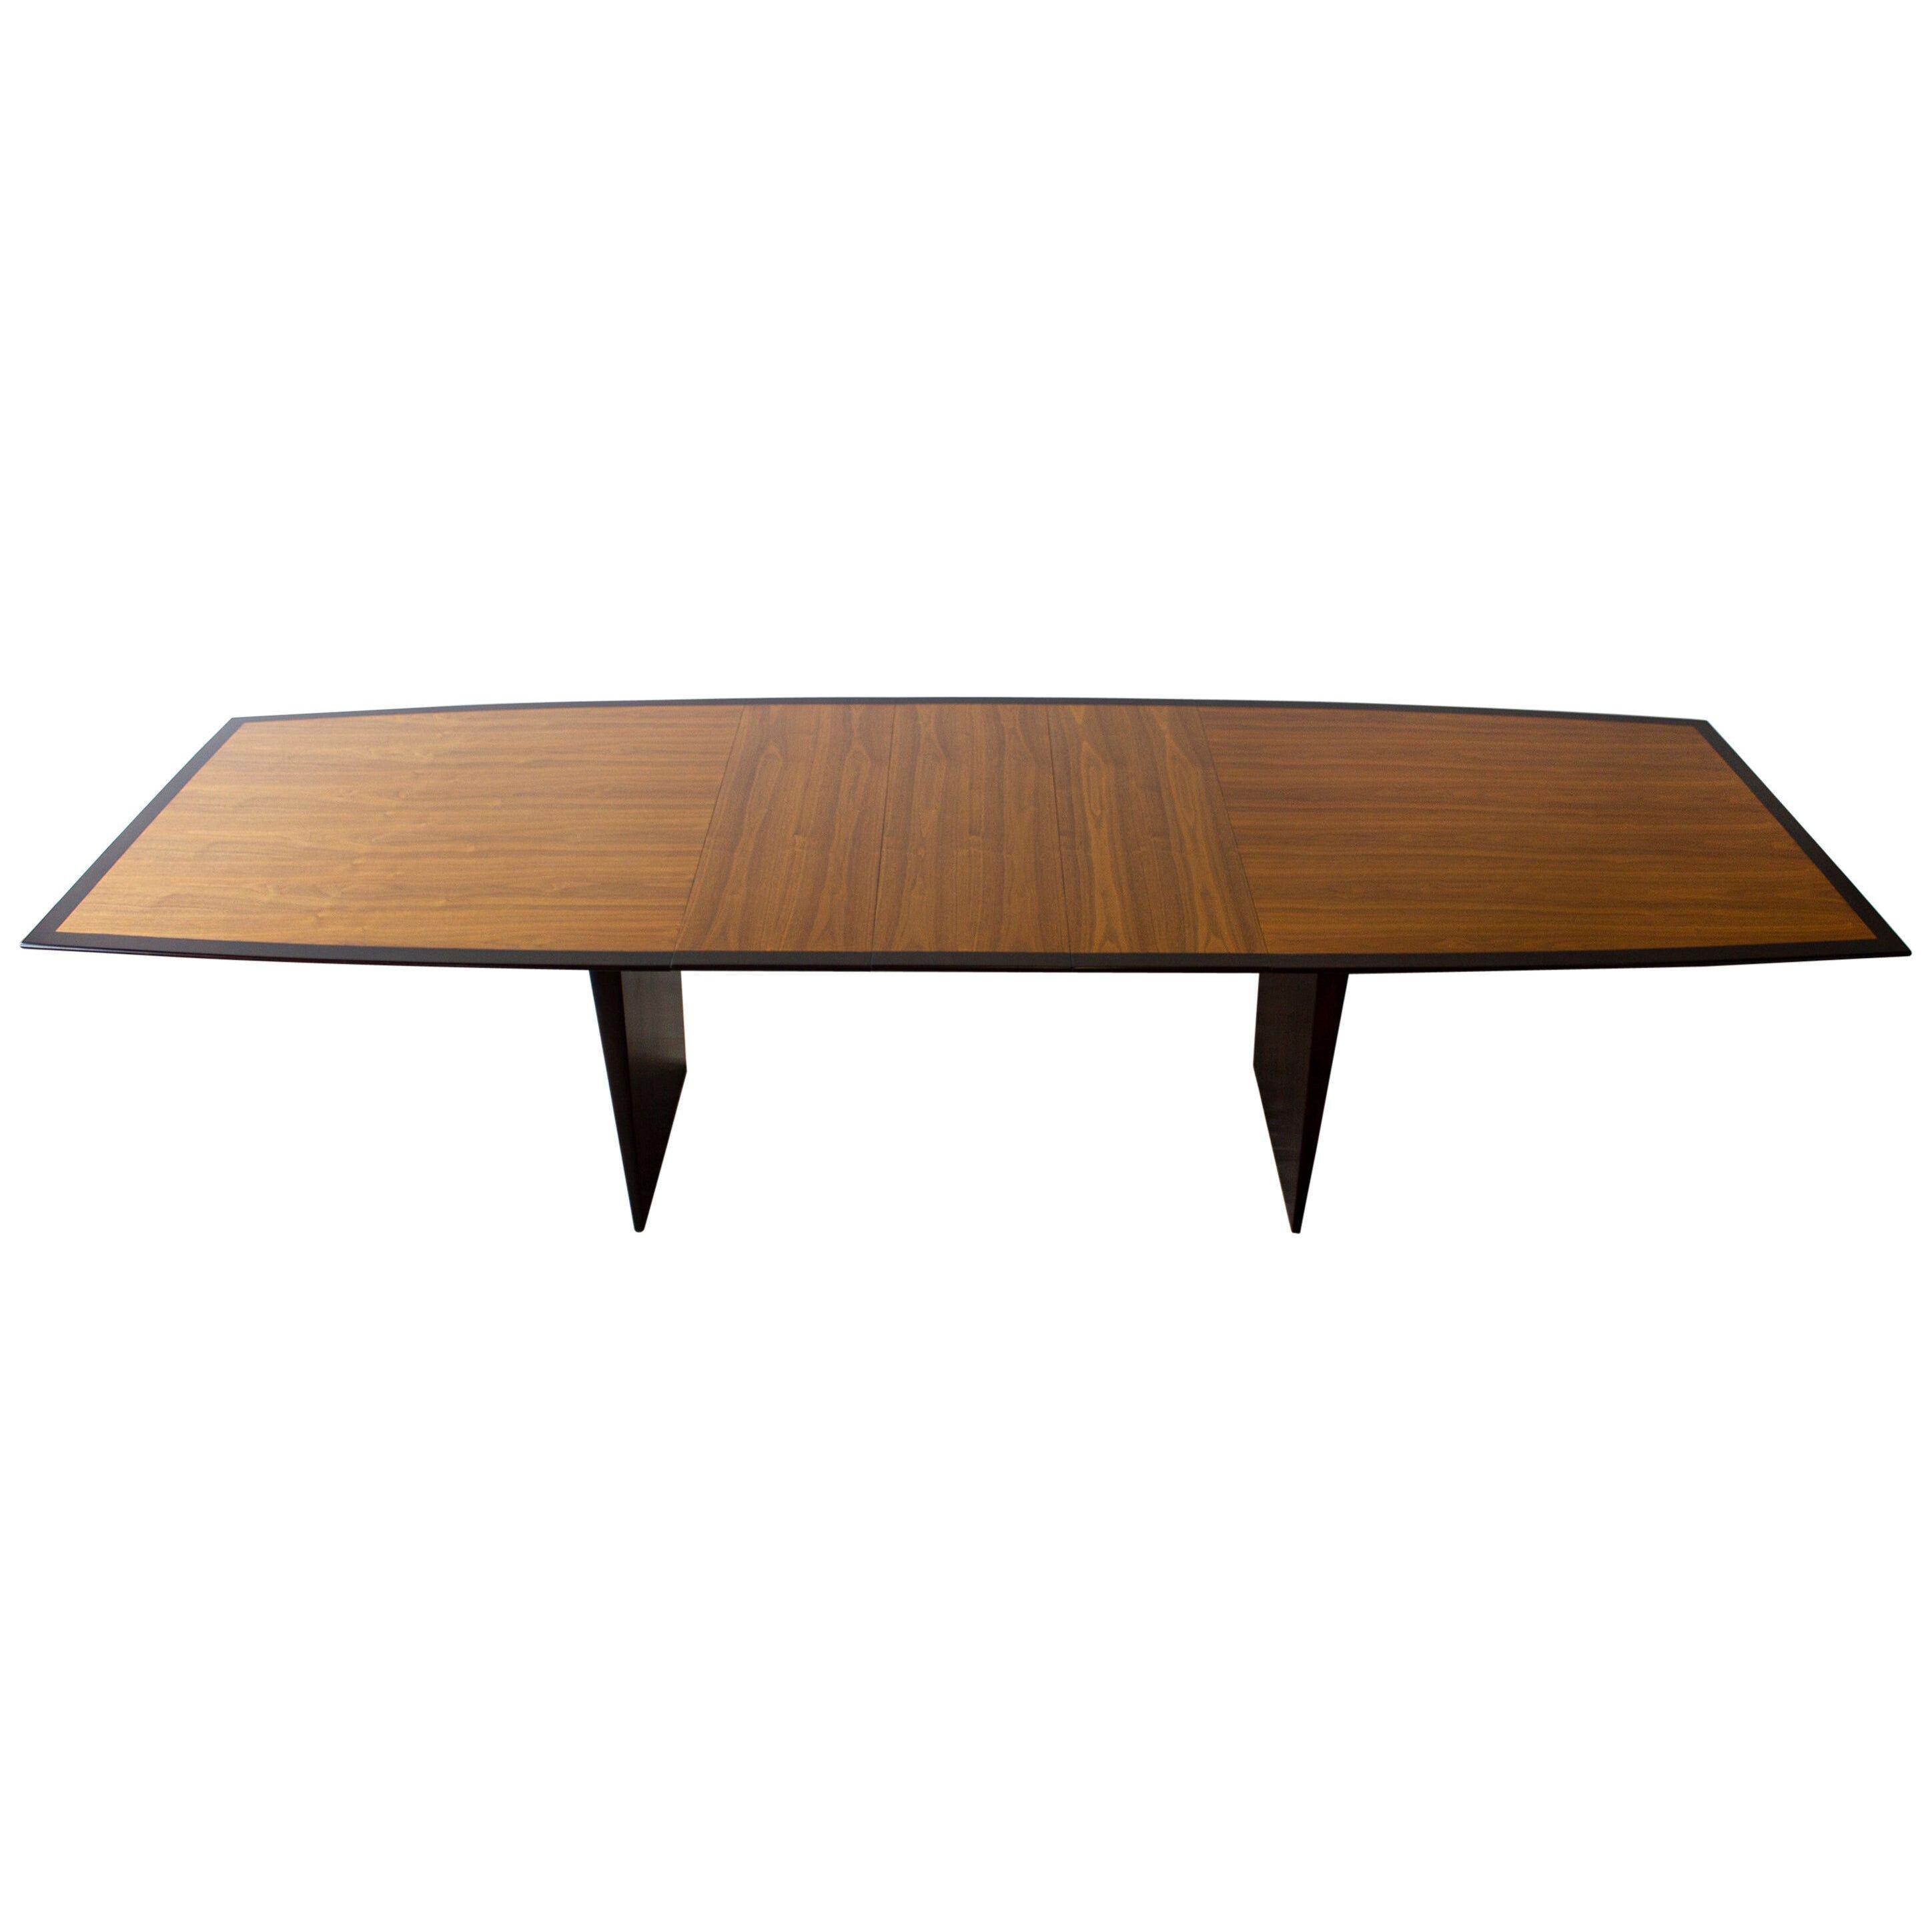 Edward Wormley Dining Table for Dunbar Model 5965 Special Order Walnut Top 1950s